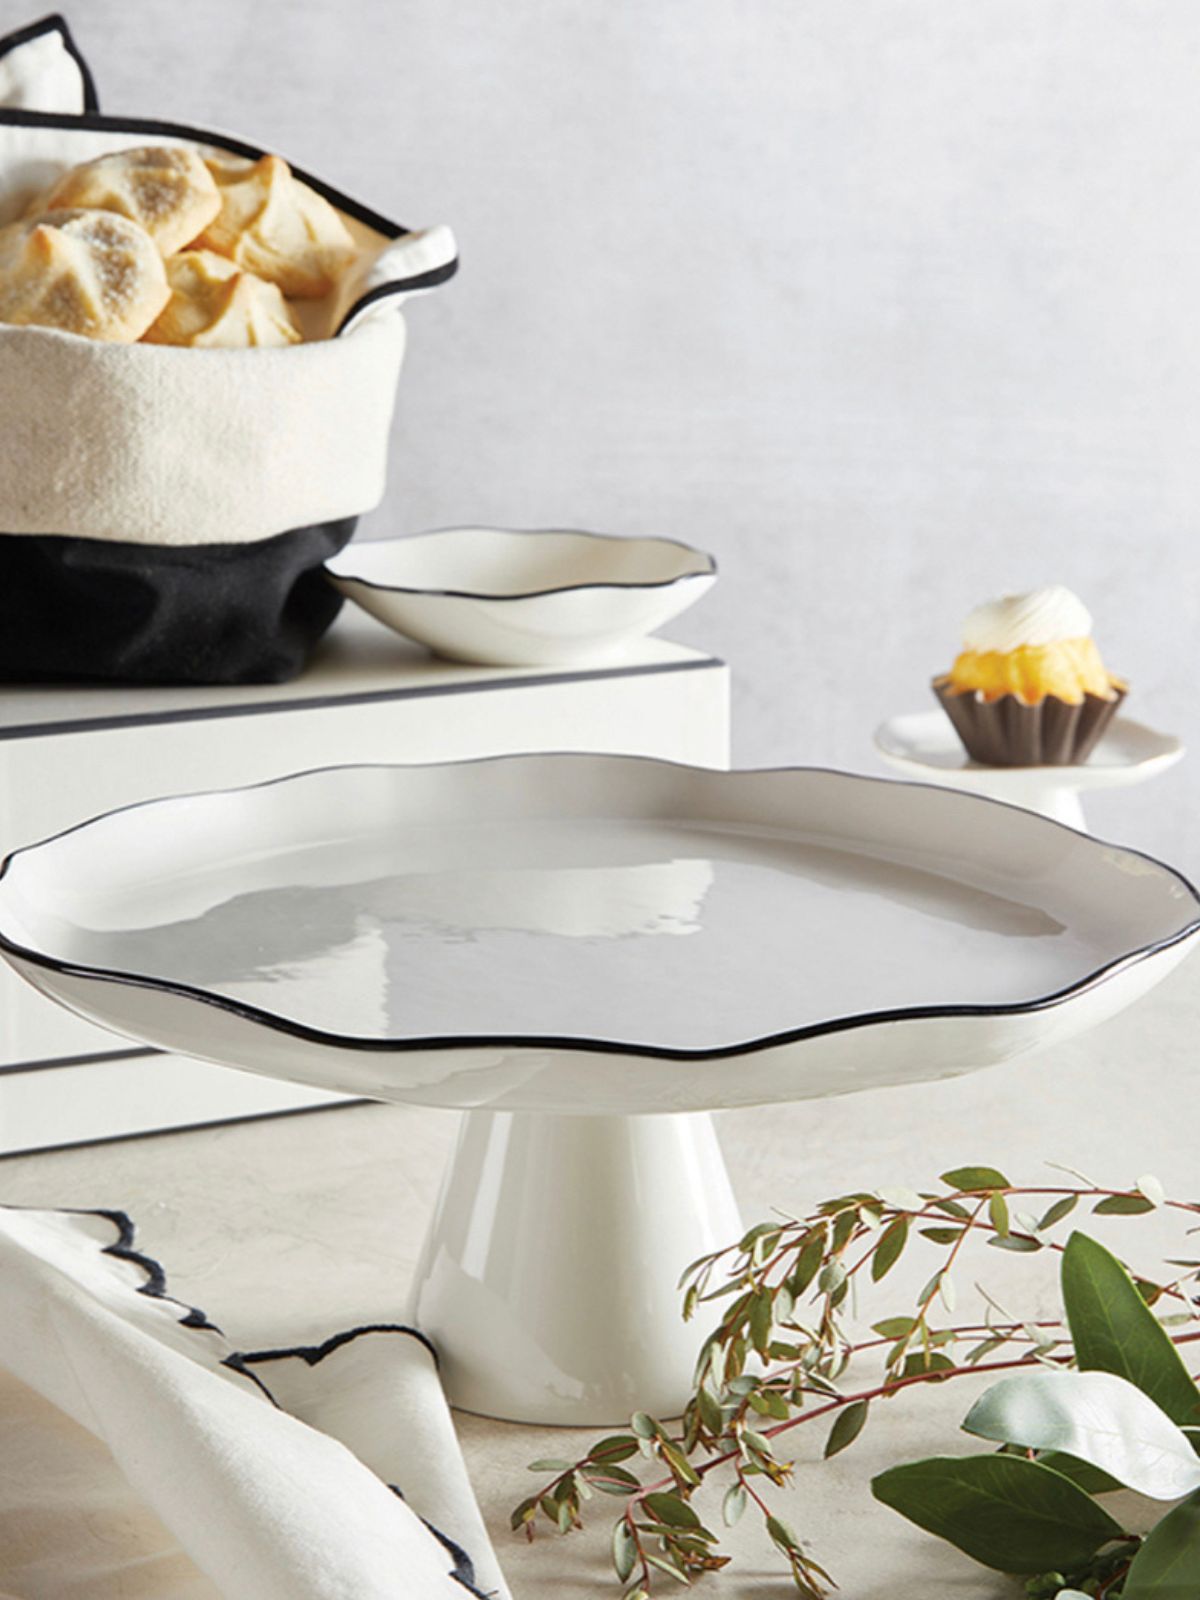 This 11.5 D Pedestal Tray Features Minimalist modern design with a classic white ceramic with black edges to provide a clean presentation of your favorite desserts and appetizers. Sold by KYA Home Decor 